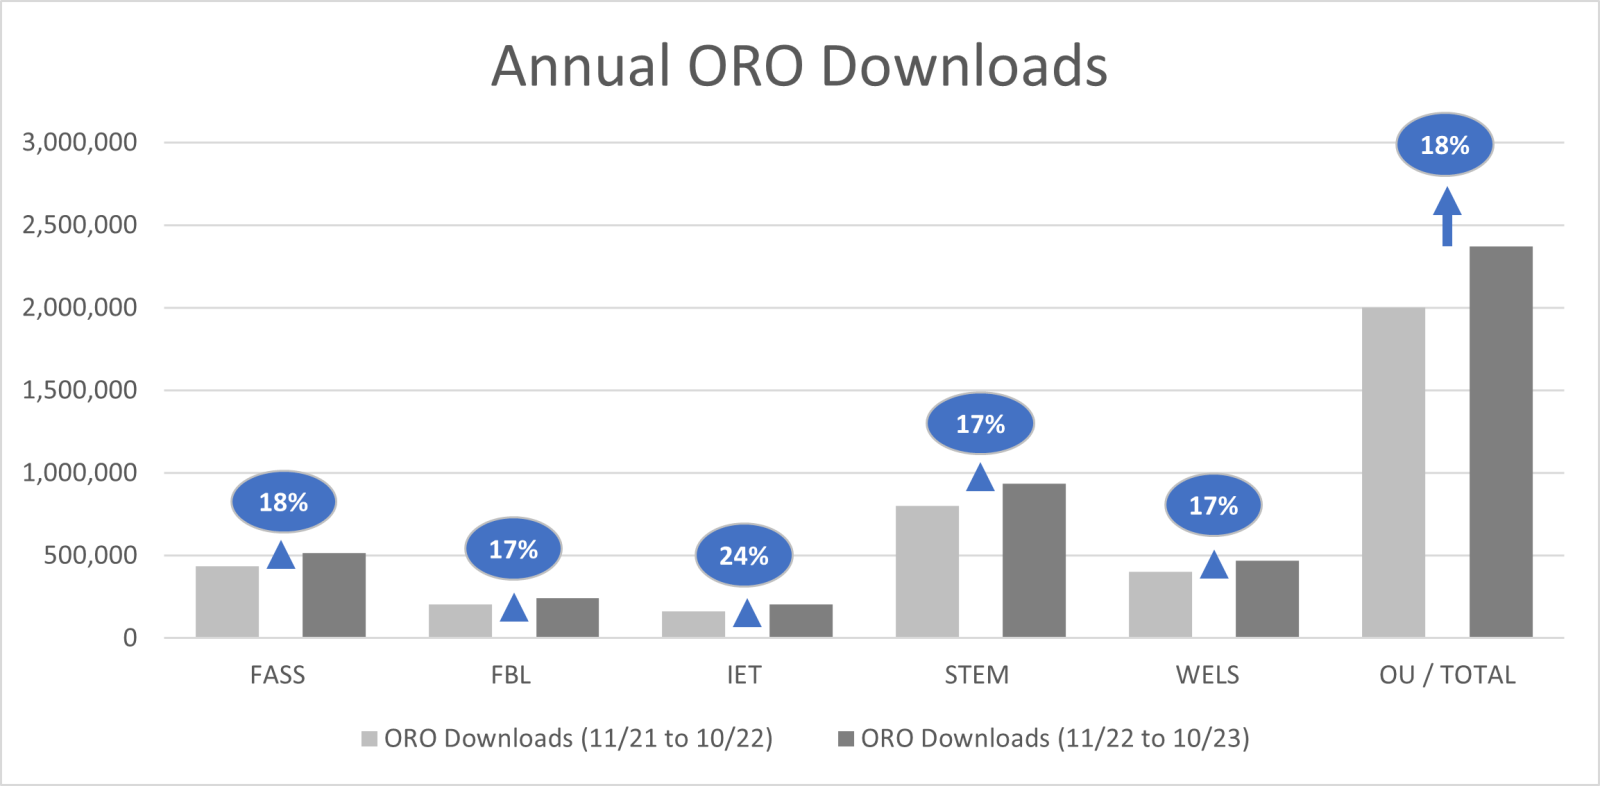 Bar chart depicting annual ORO downloads